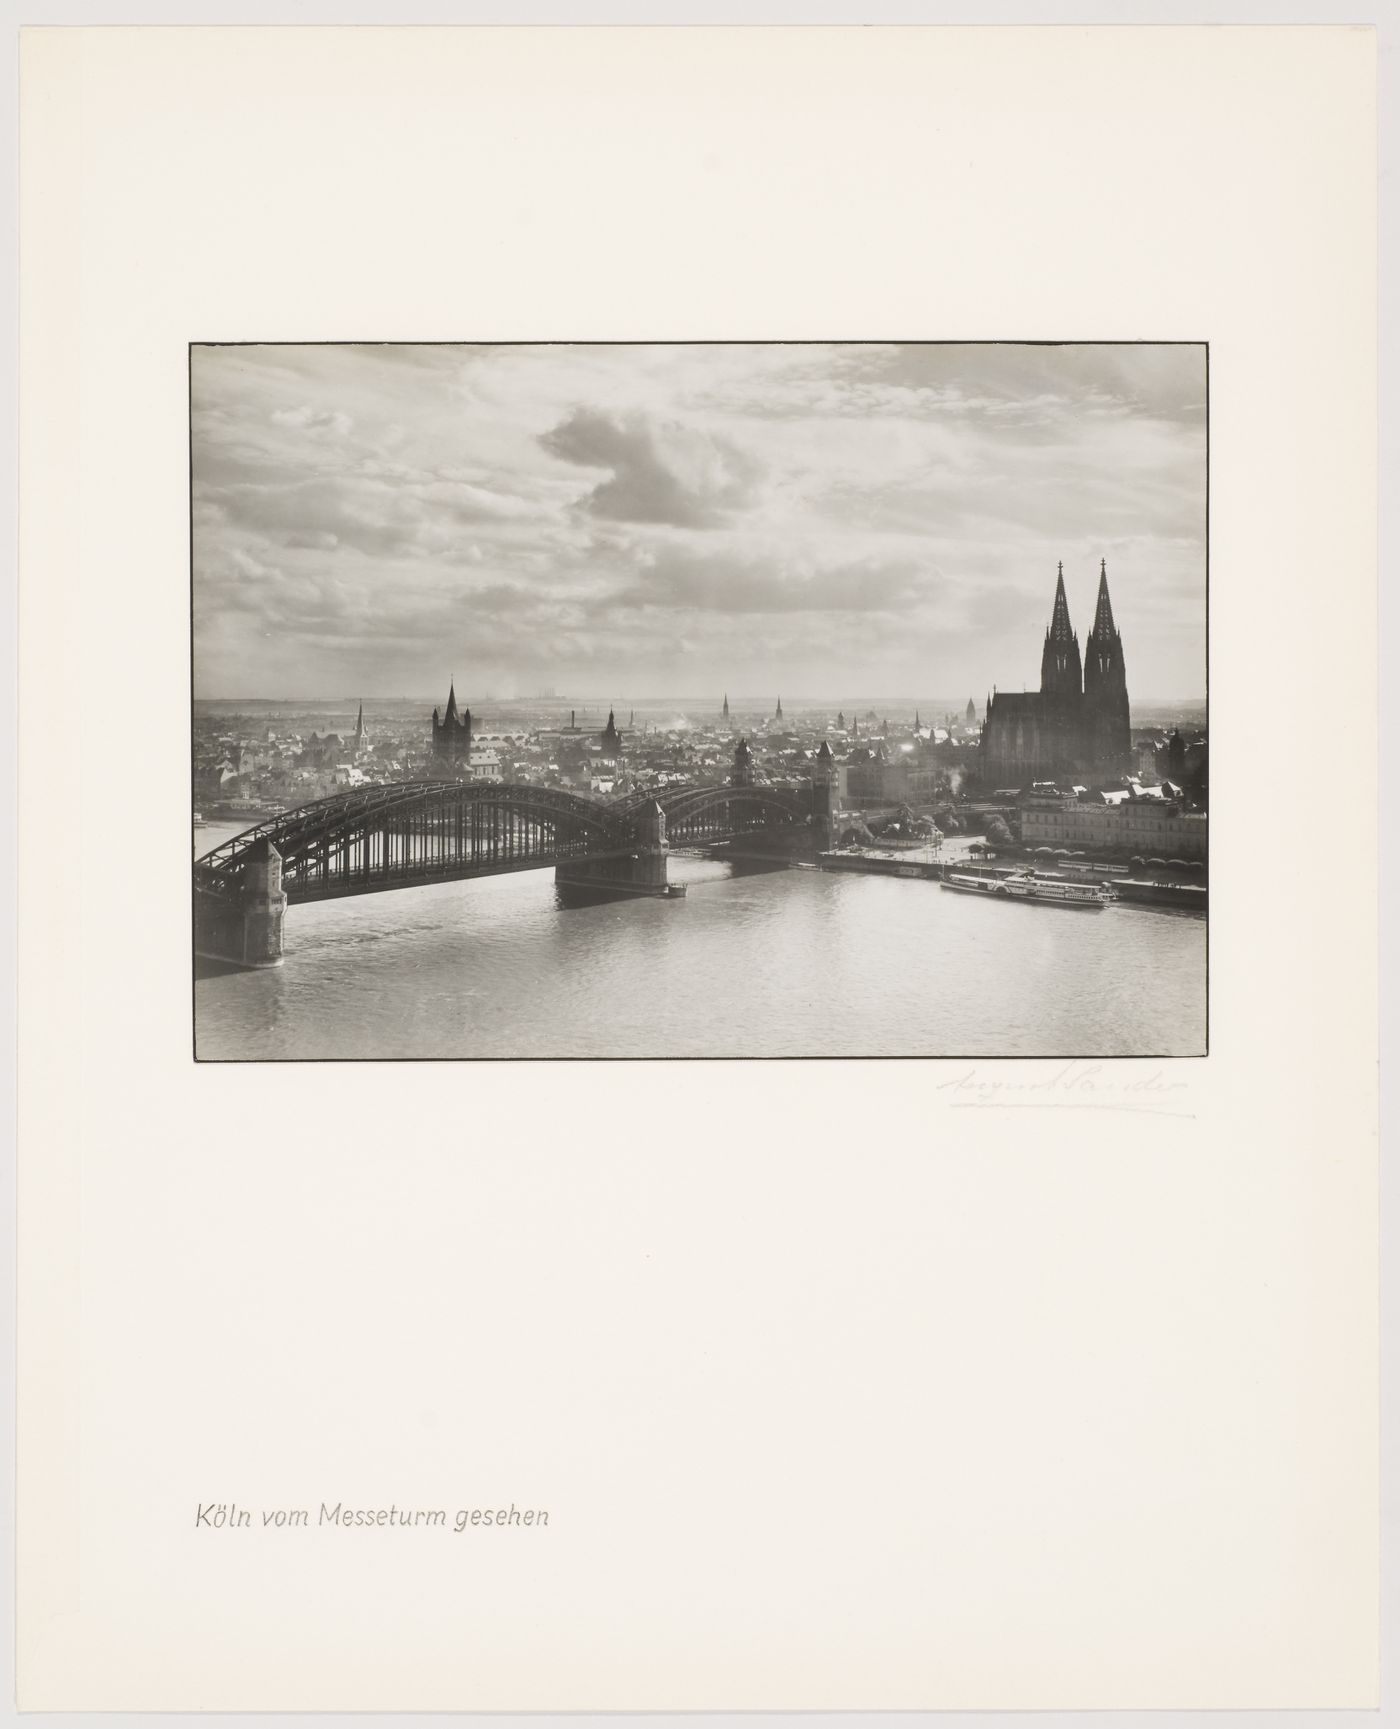 View of Cologne, seen from the Messeturm, Germany